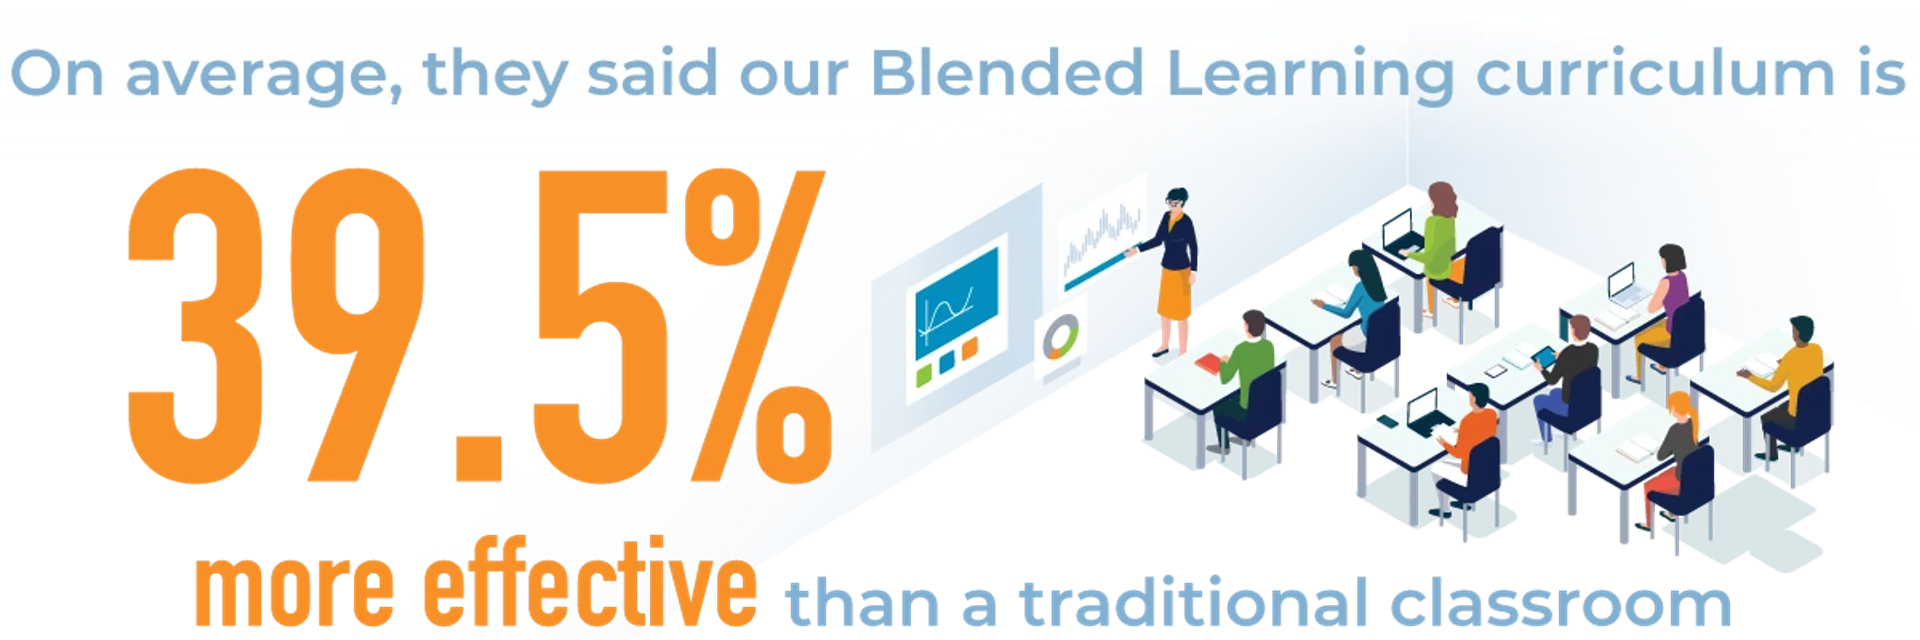 On average, blended learning is 39.5% more effective than traditional classroom training